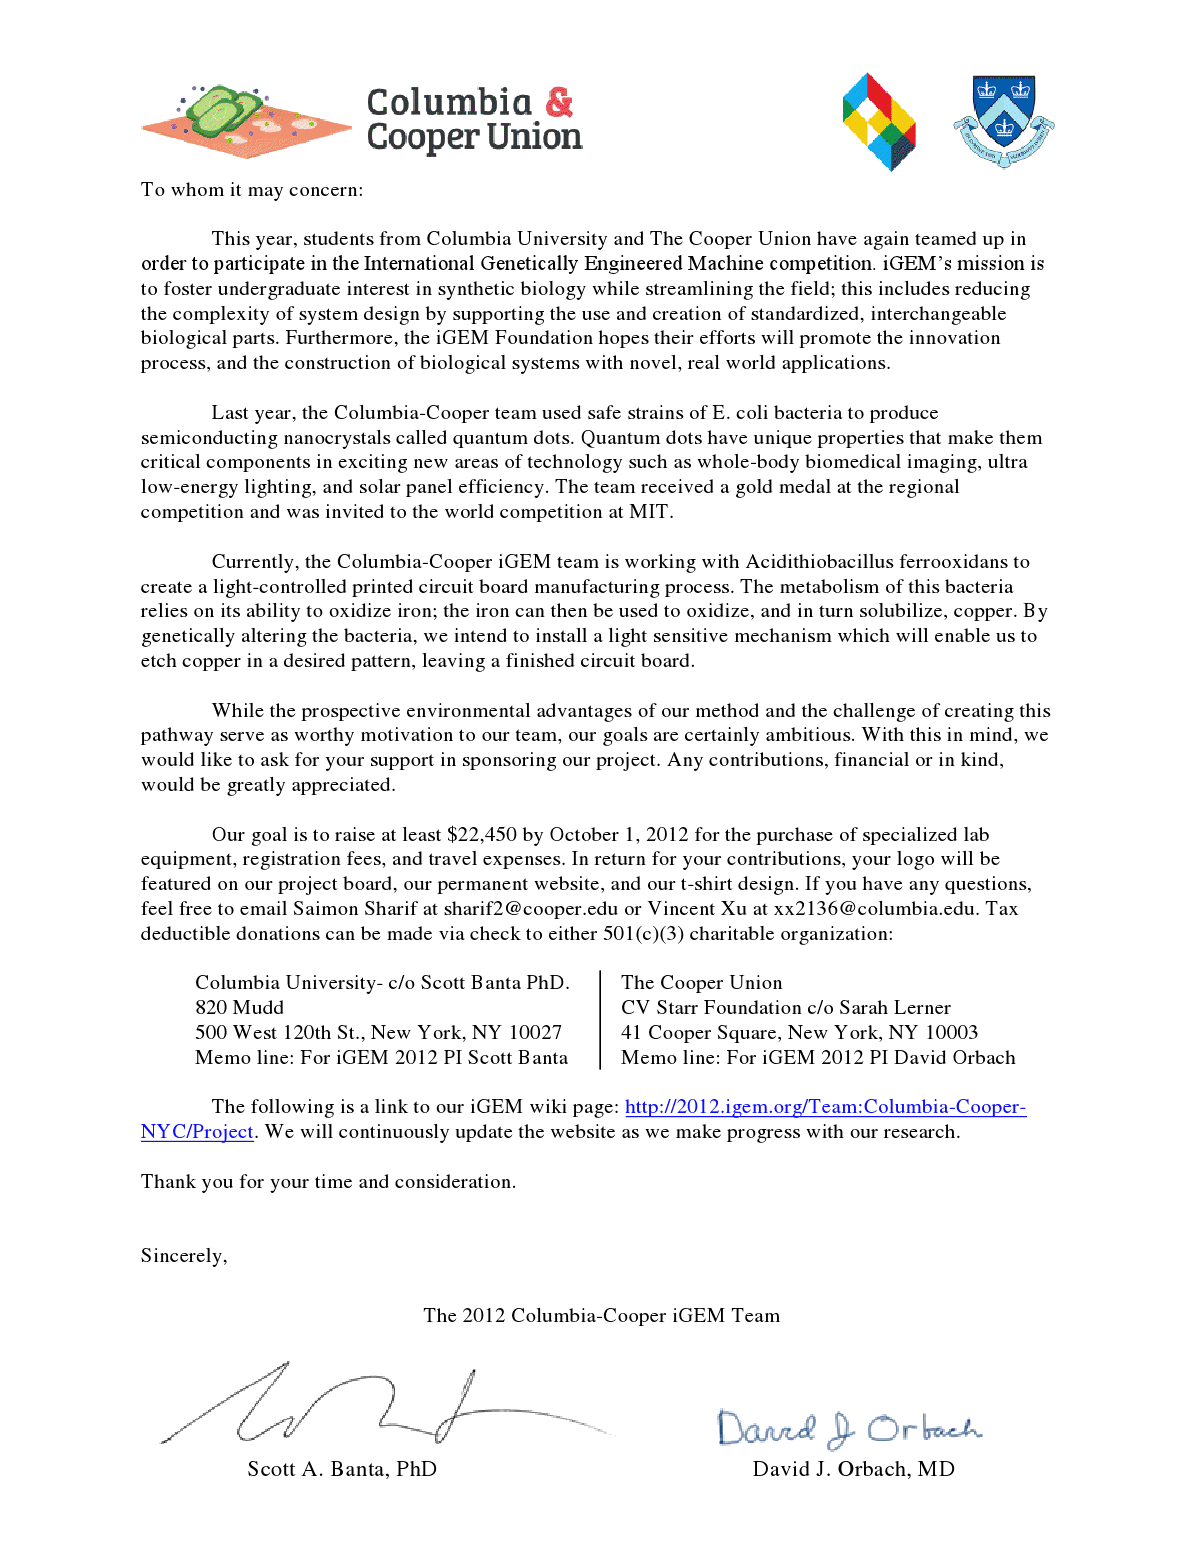 Columbia-Cooper-NYC Sponsor Letter.png